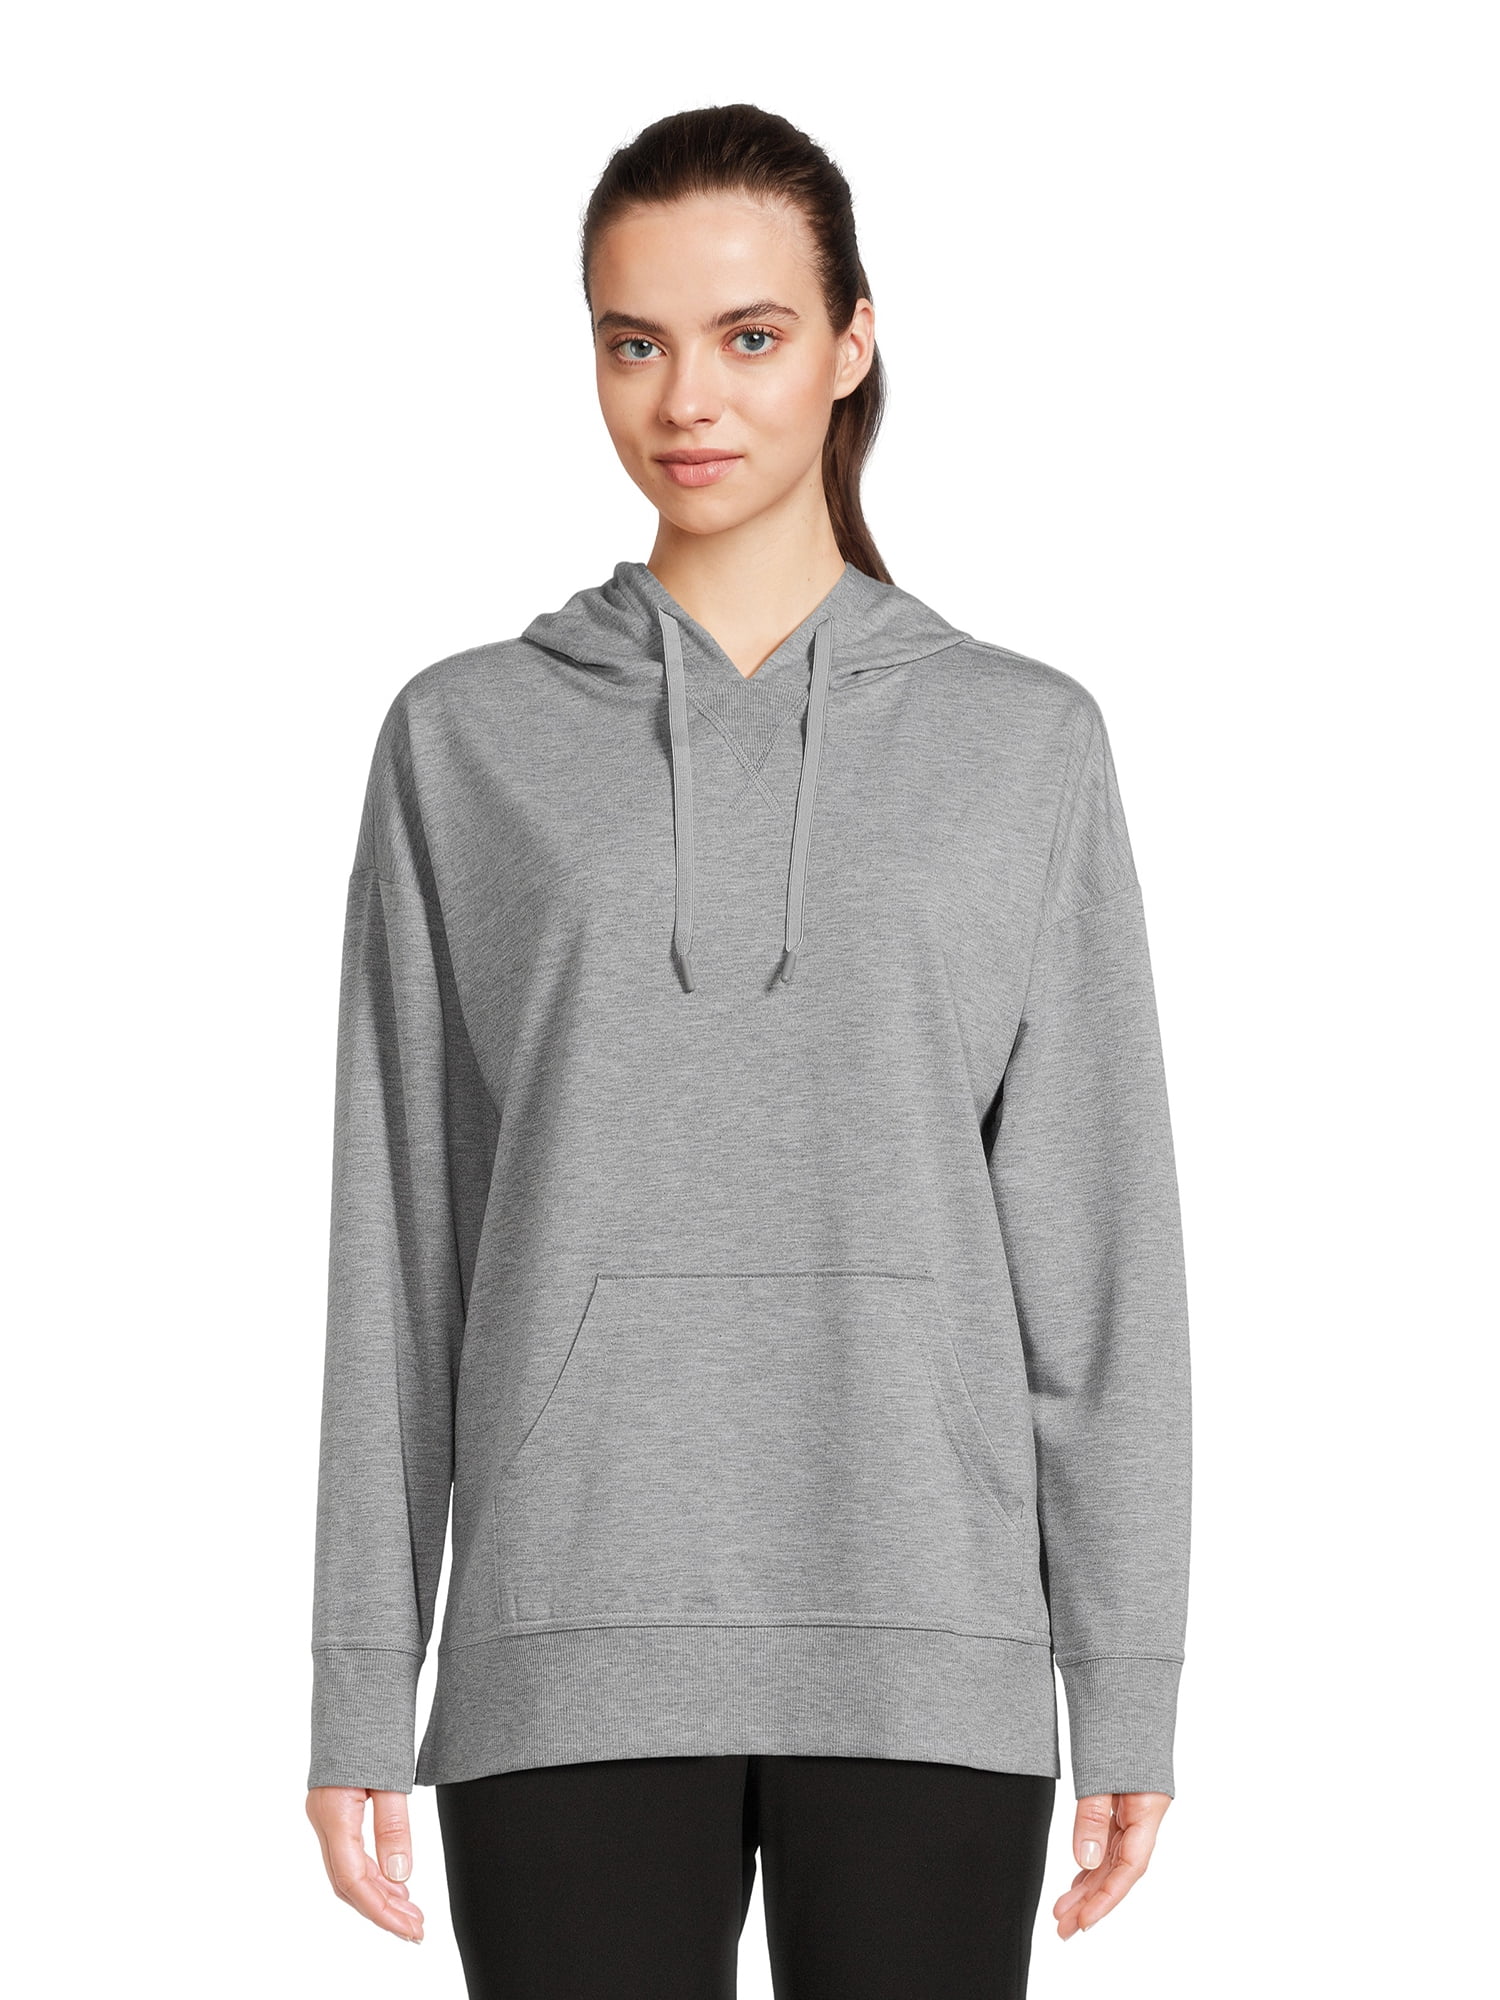 Athletic Works Women's Pullover Hoodie with Long Sleeves, Sizes XS-XXXL ...